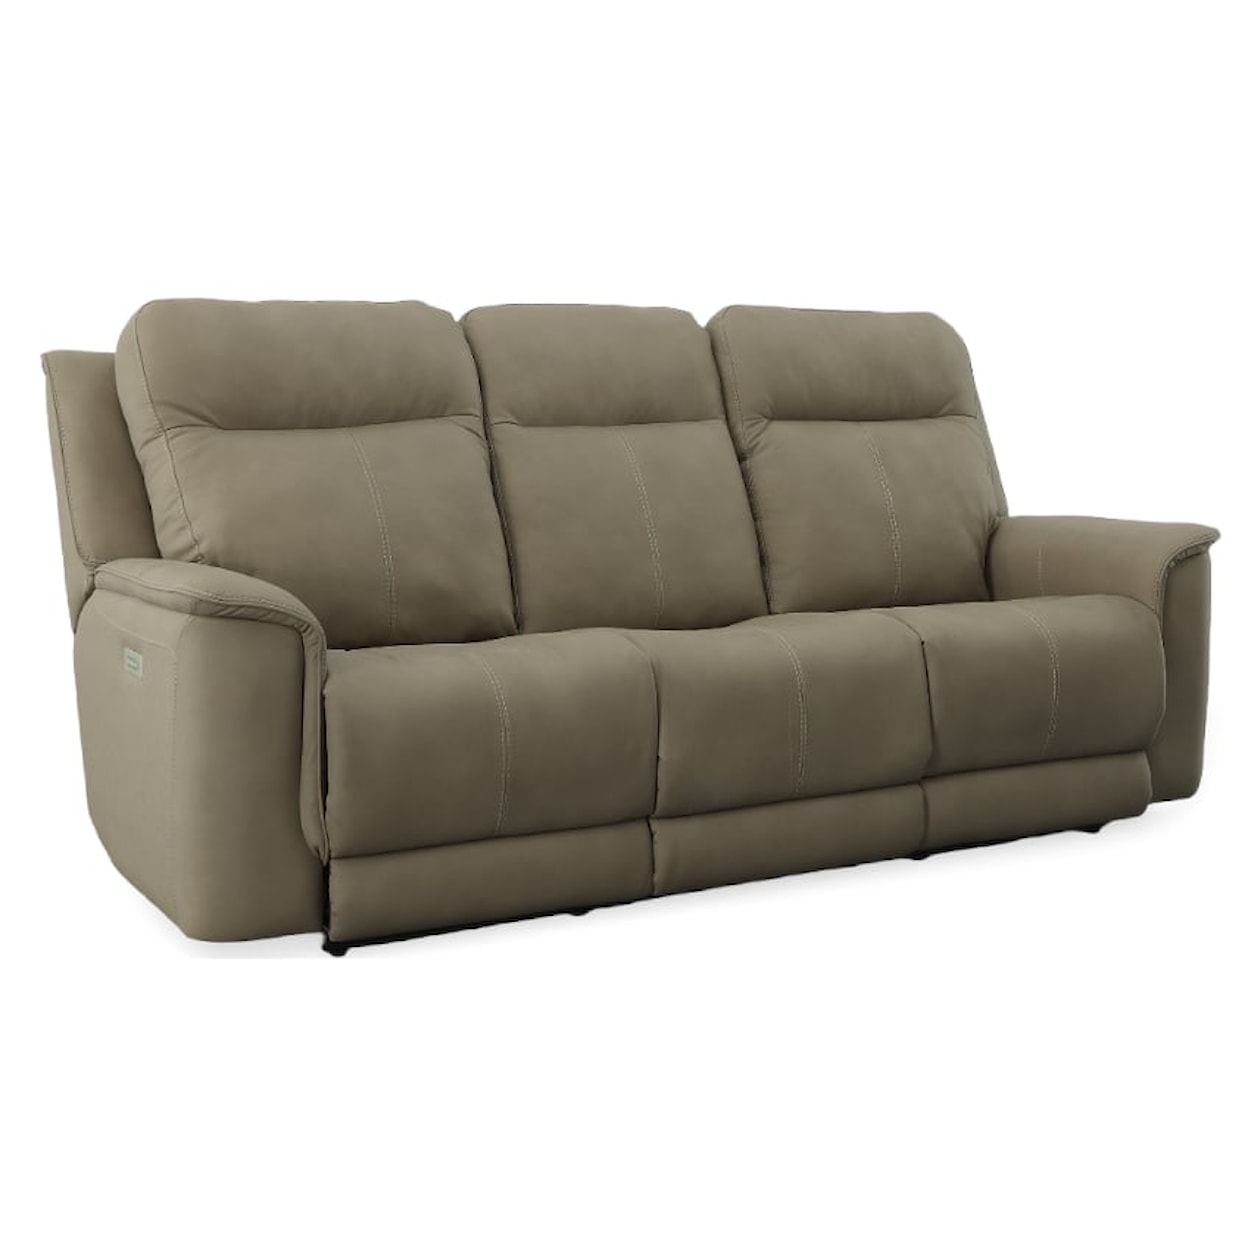 Stanton 728 Power Reclining Sofa with Power Headrests